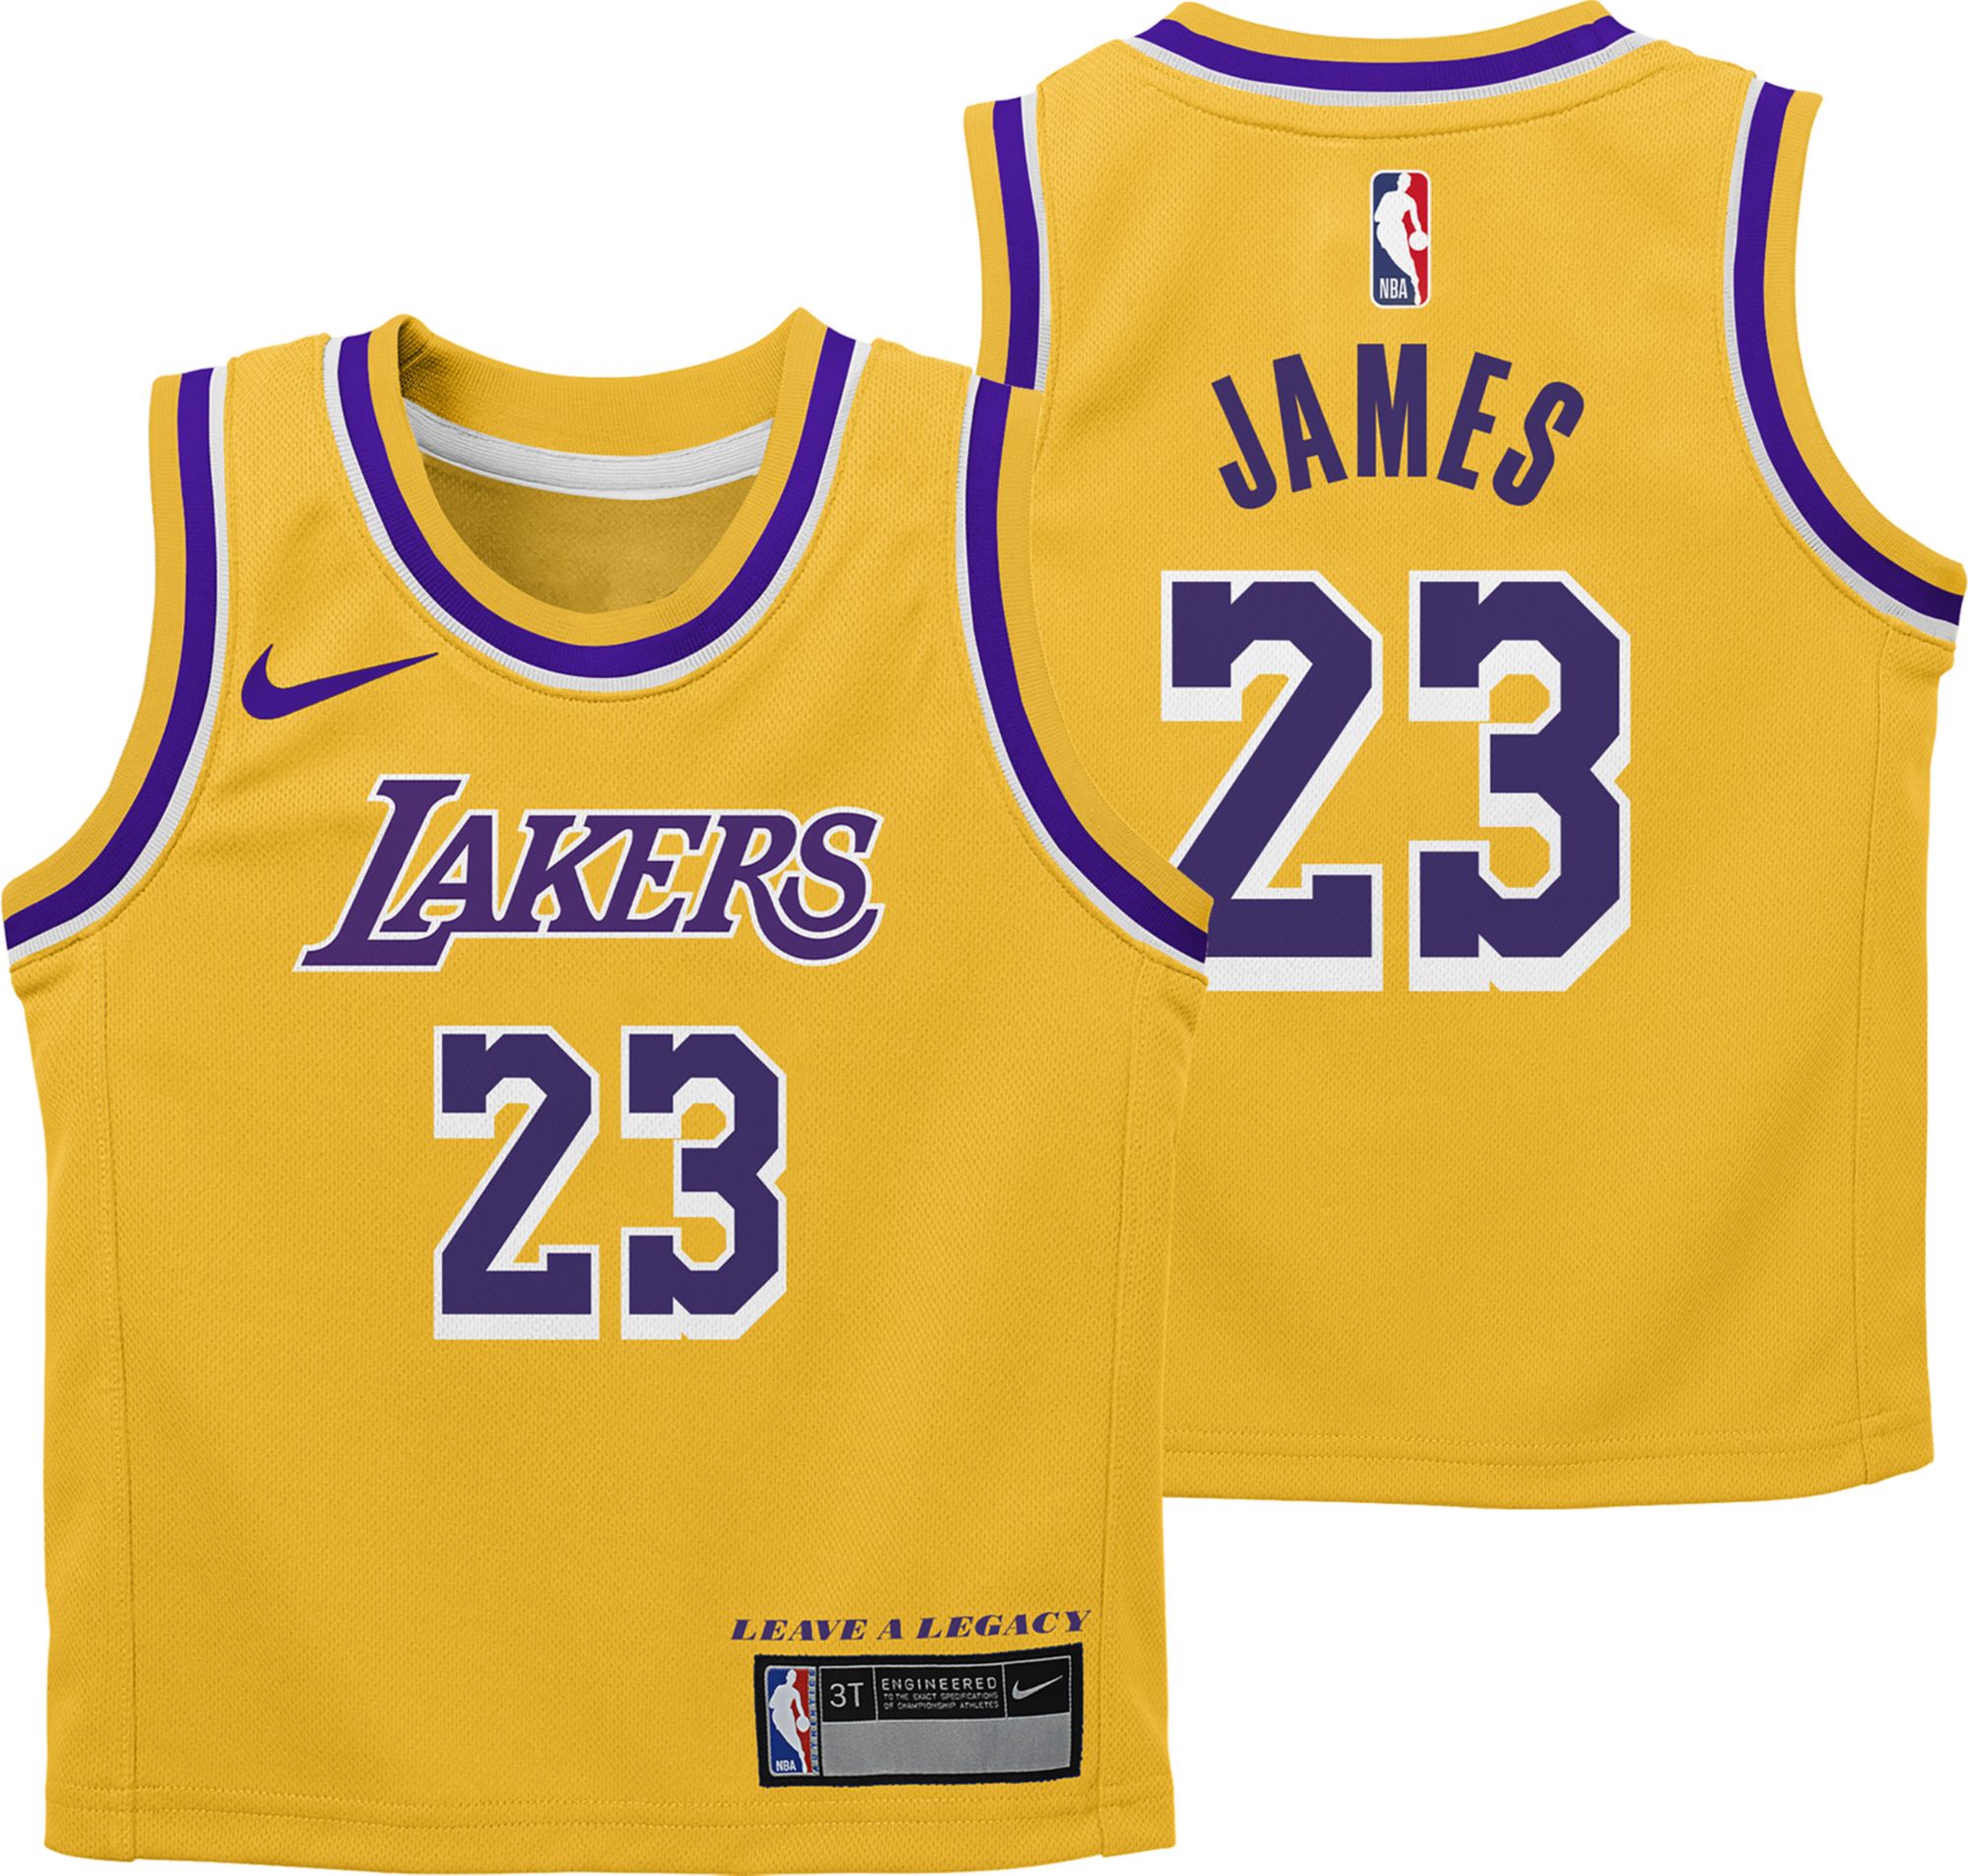 Nike+NBA+LA+Lakers+Shooting+Practice+Shirt+Warm+Up+Player+Game+Issued+Sz+Large-T  for sale online